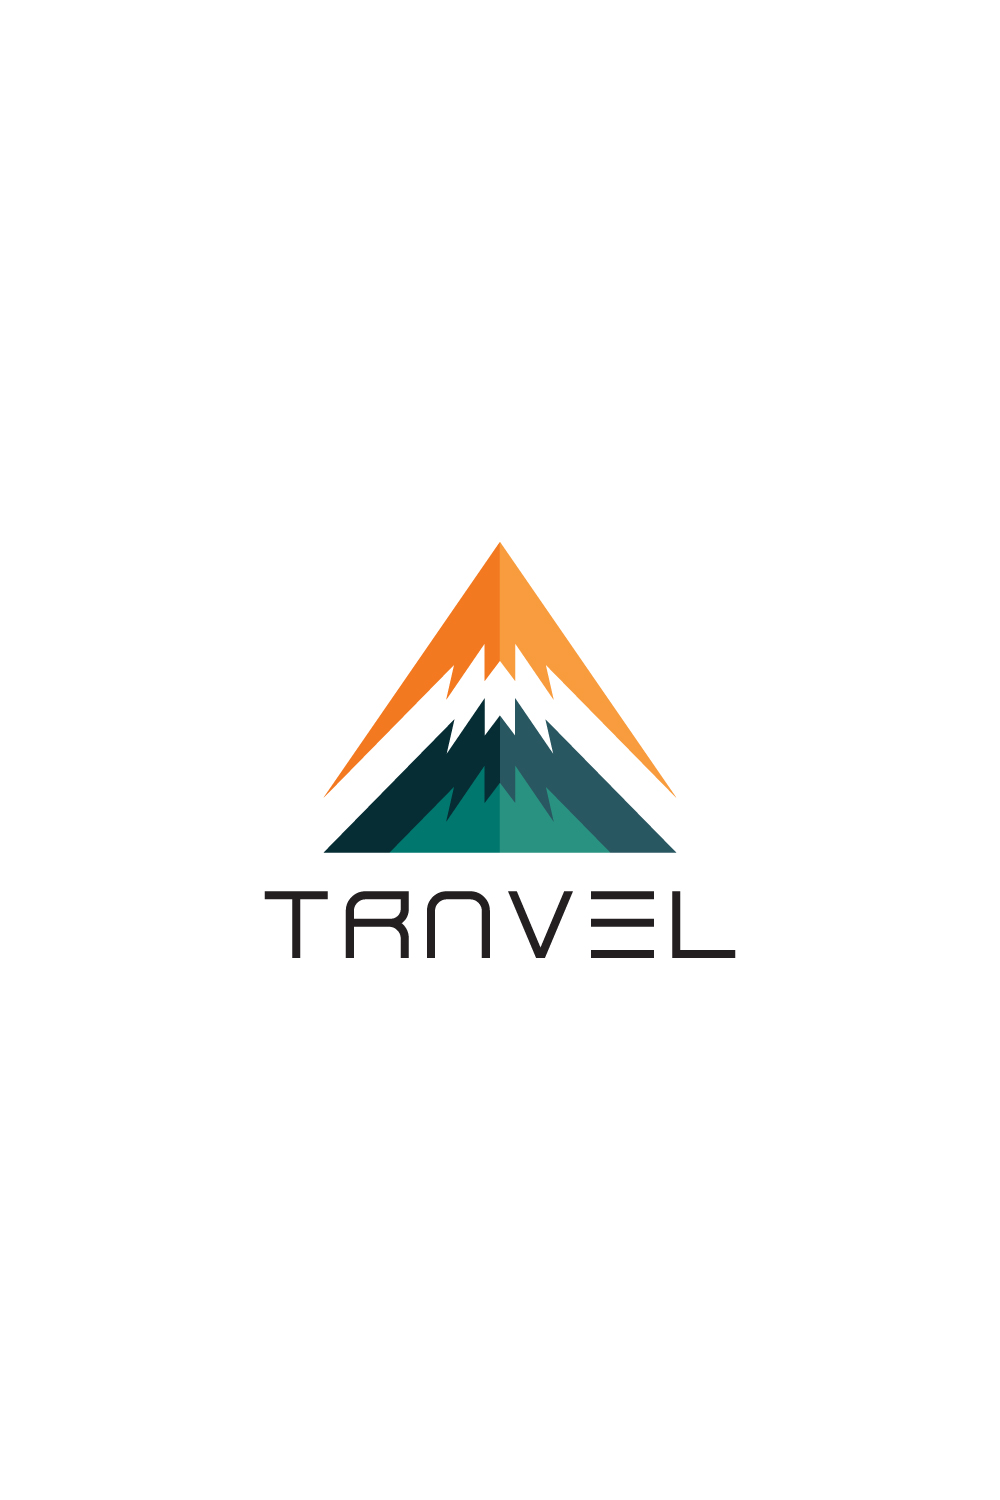 Travel logo for your business pinterest preview image.